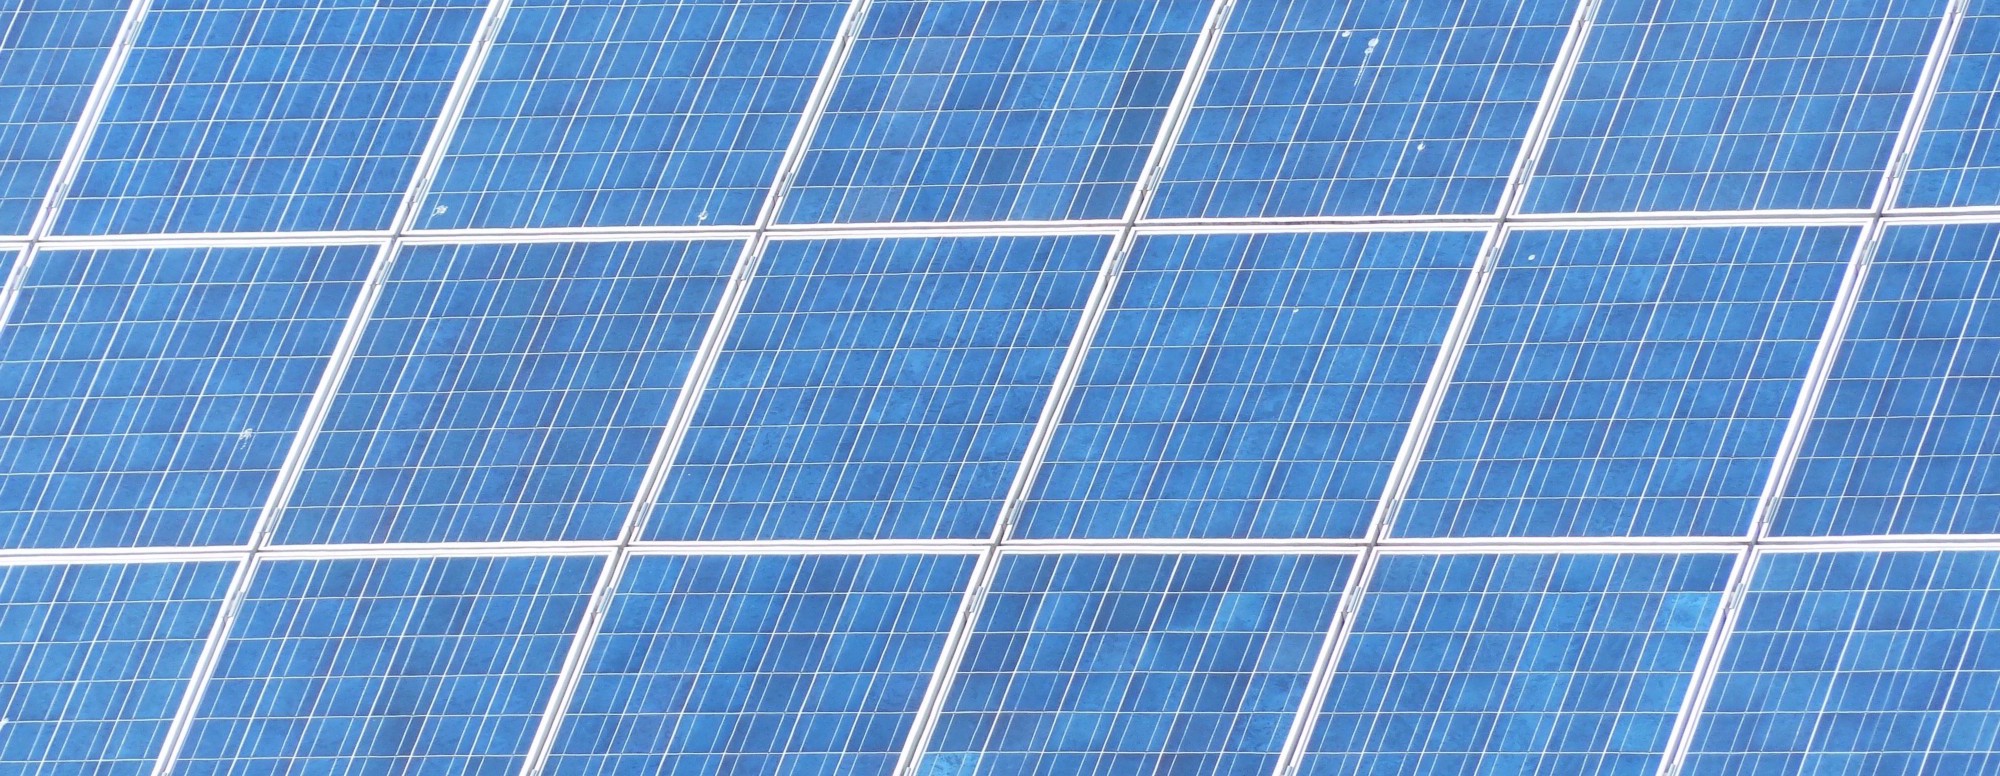 A Bright Solar Future Will Be Flawed and Imperfect